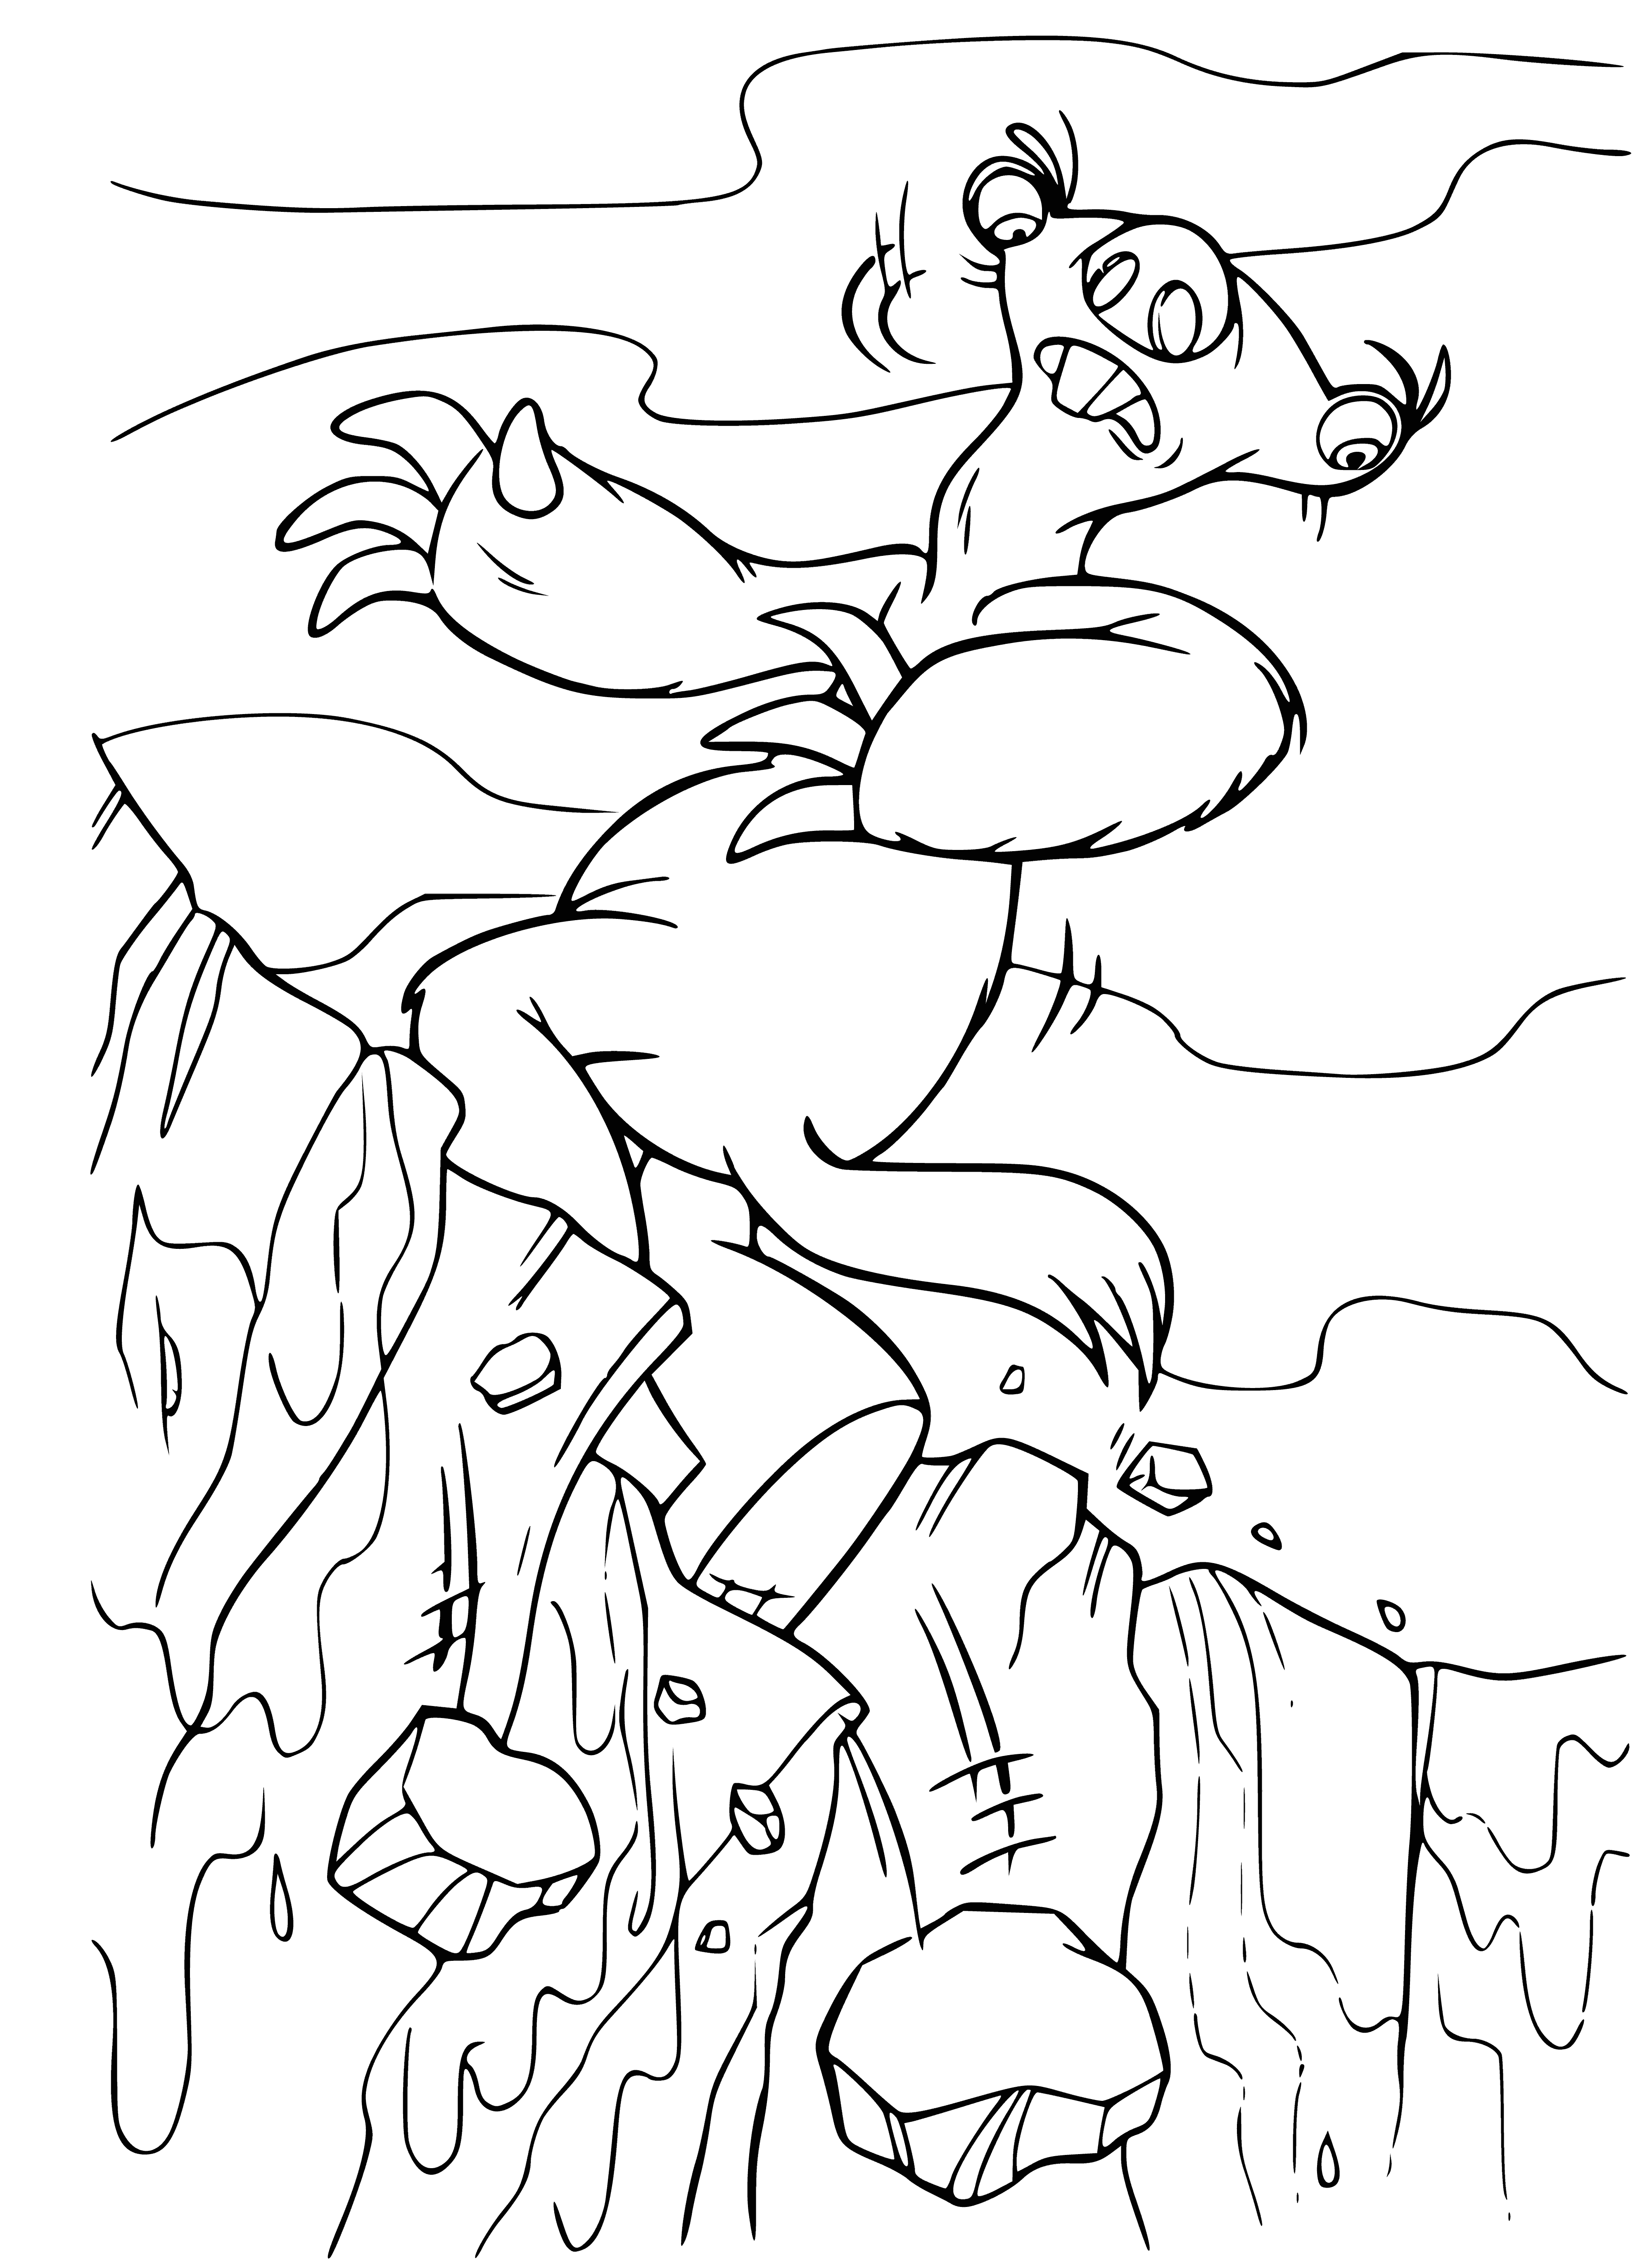 coloring page: Ice float in a body of water covered in snow, with mountains in the distance. #coloringpage